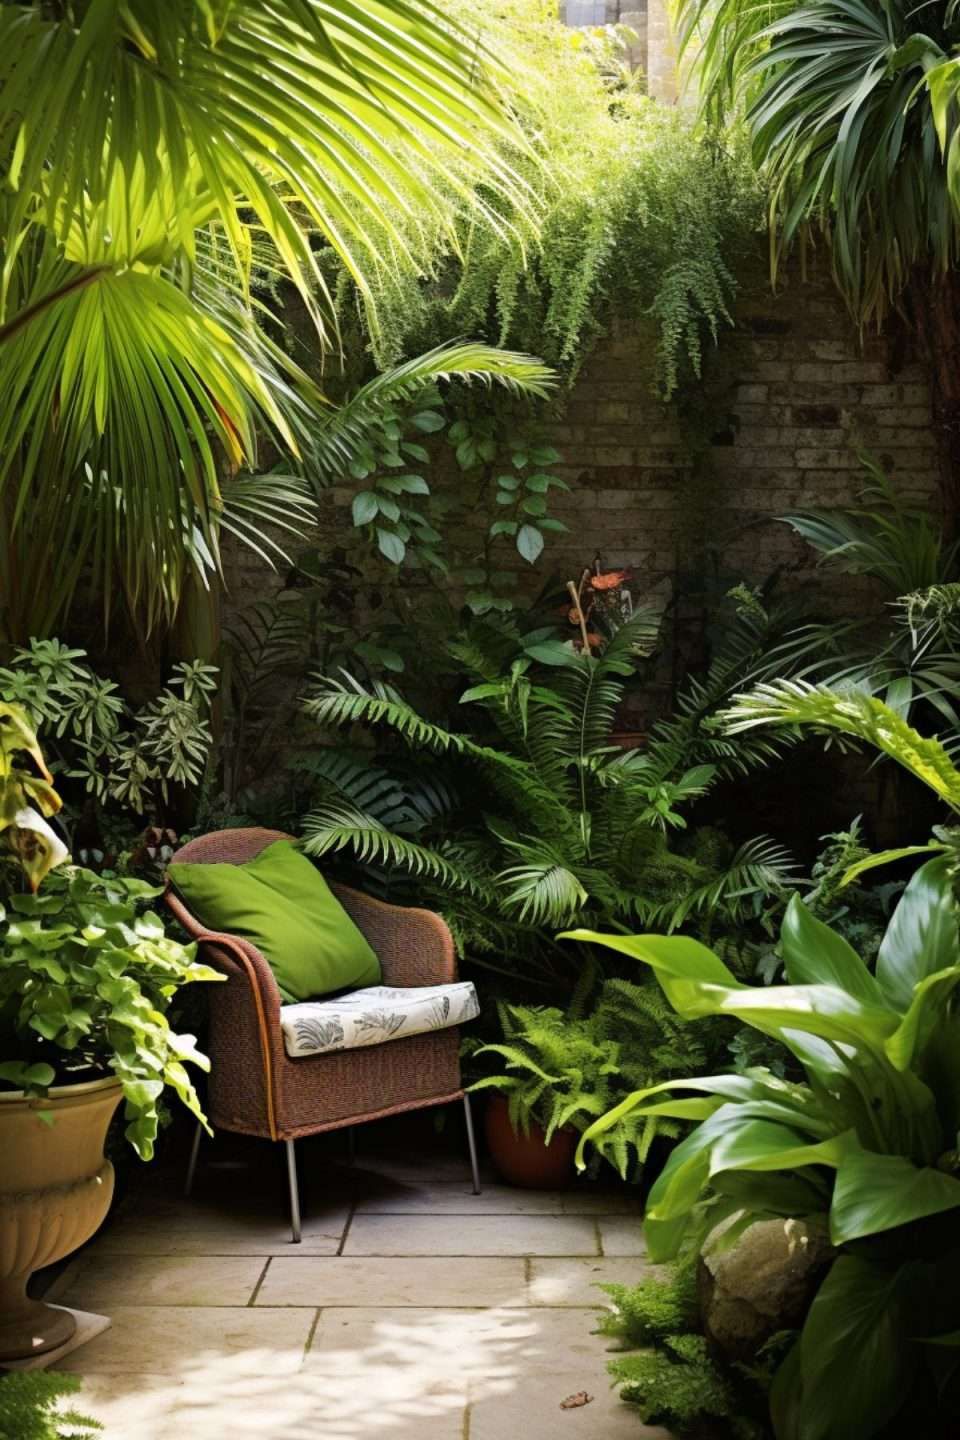 Creative Solutions for Tiny Gardens: Making the Most of Small Outdoor Spaces